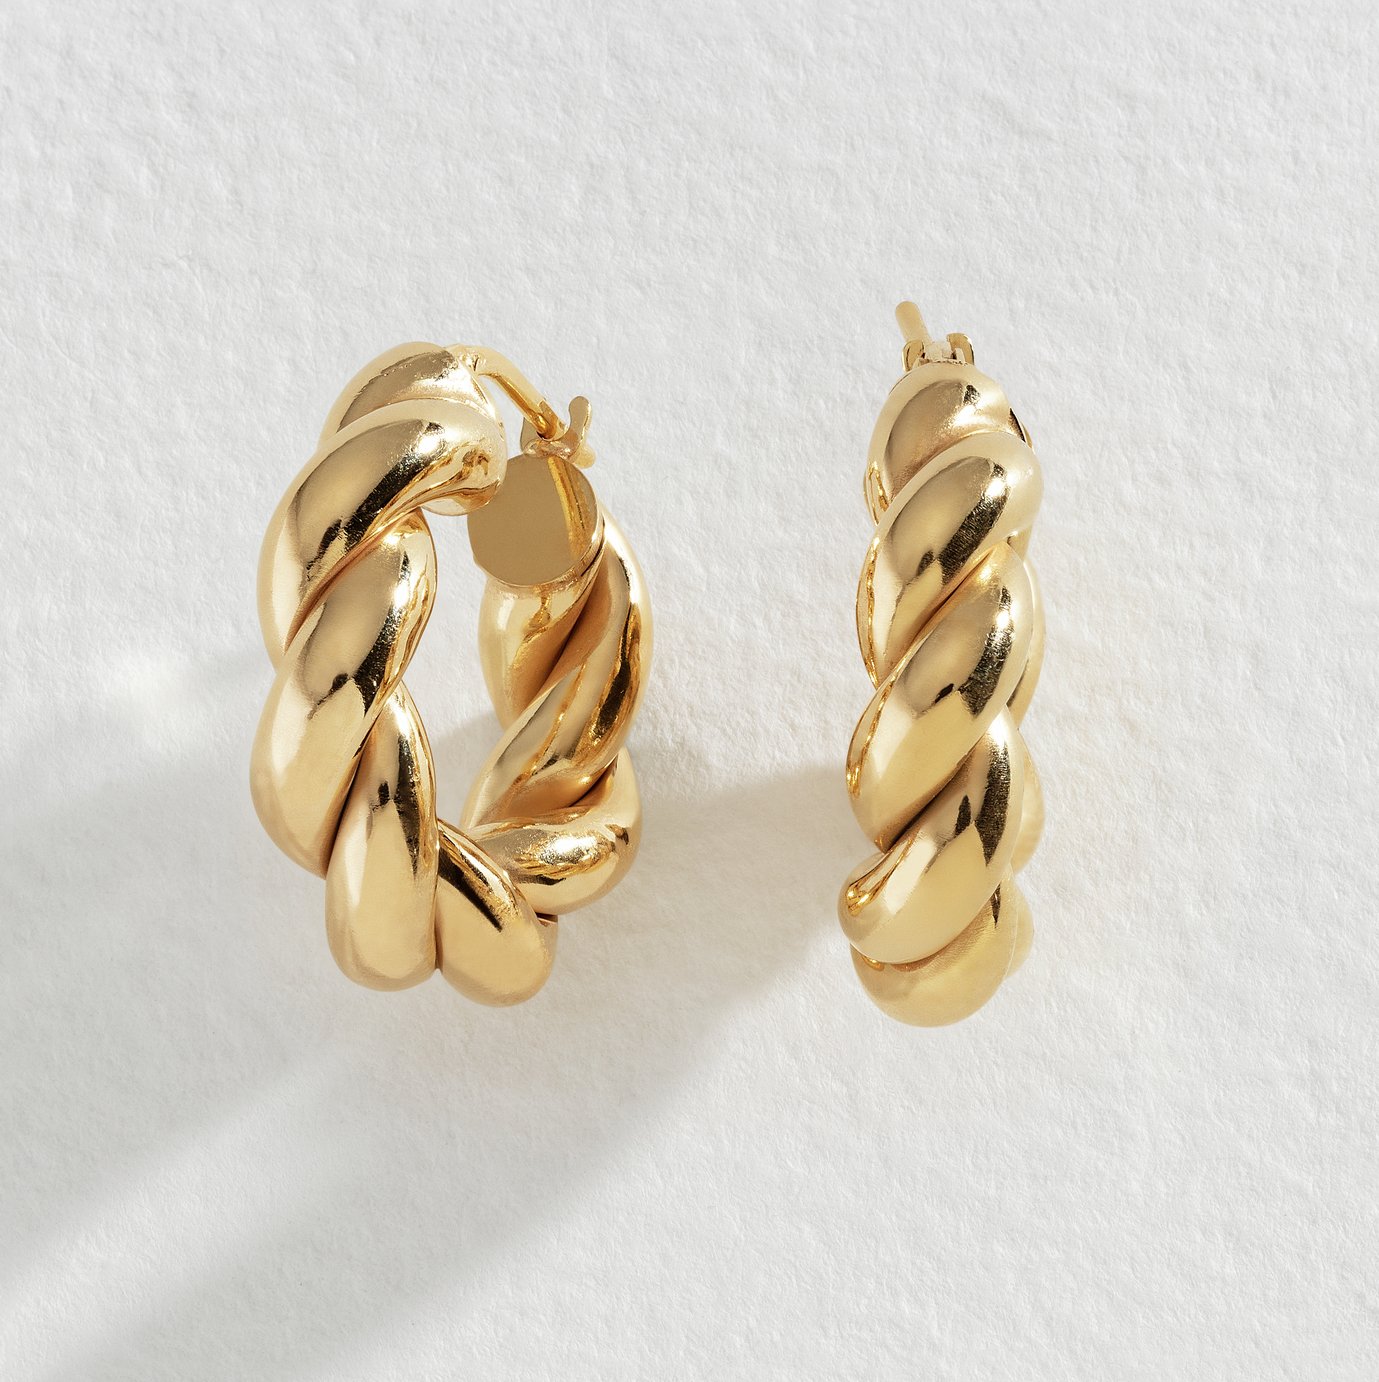 Revere 9ct Gold Plated Silver Twisted Hoop Earrings